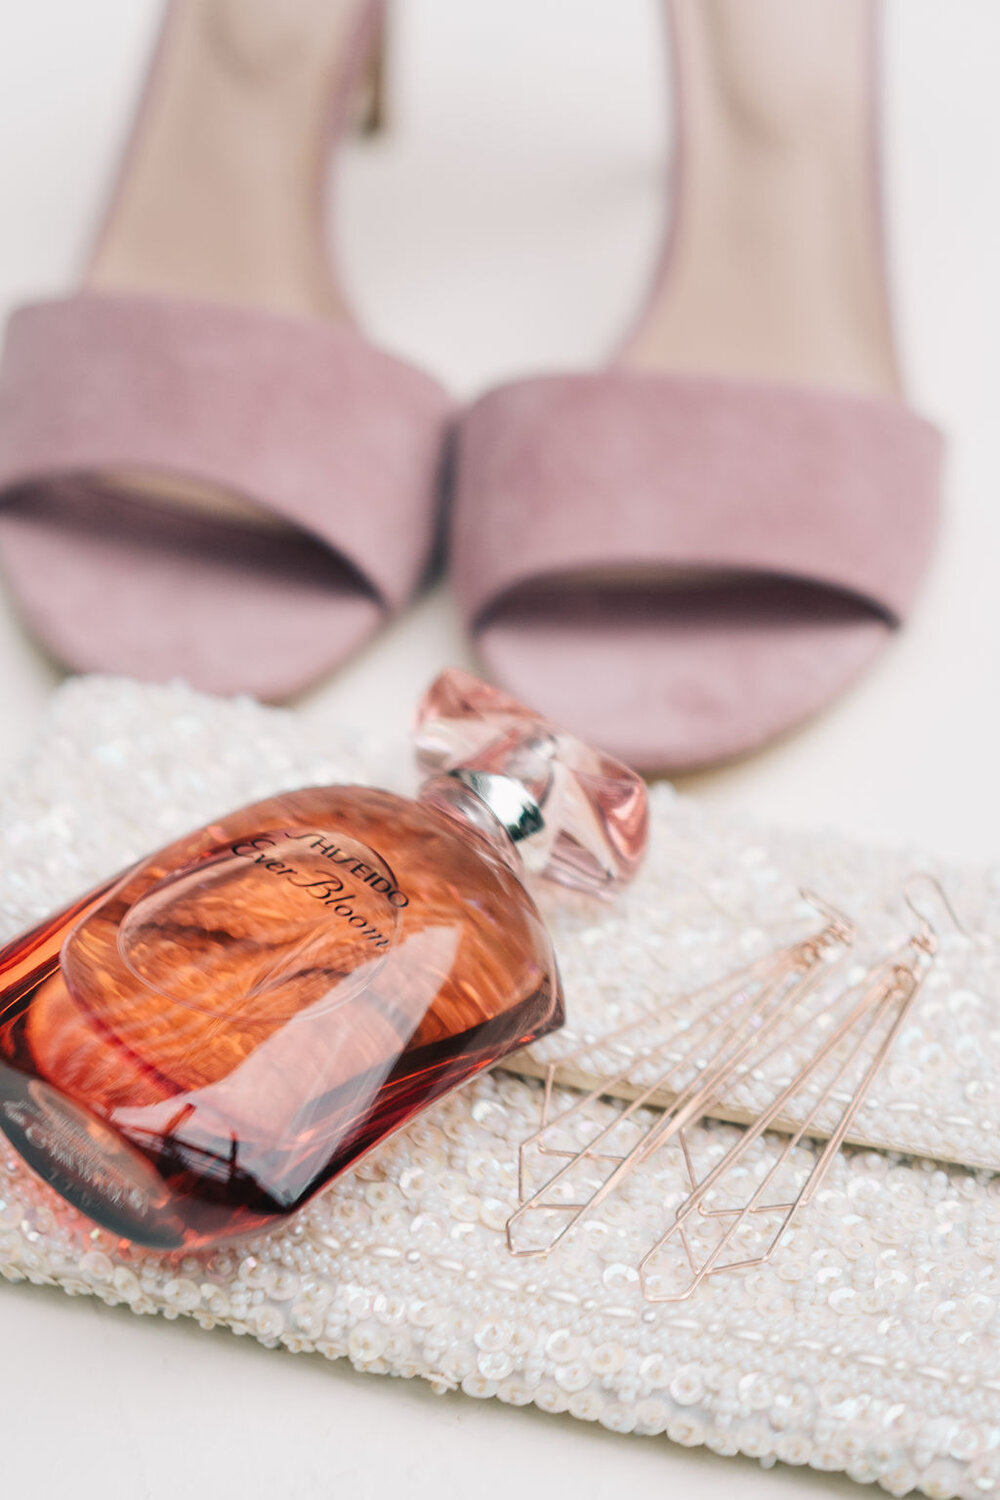 Toronto bride's wedding day accessories and shoes